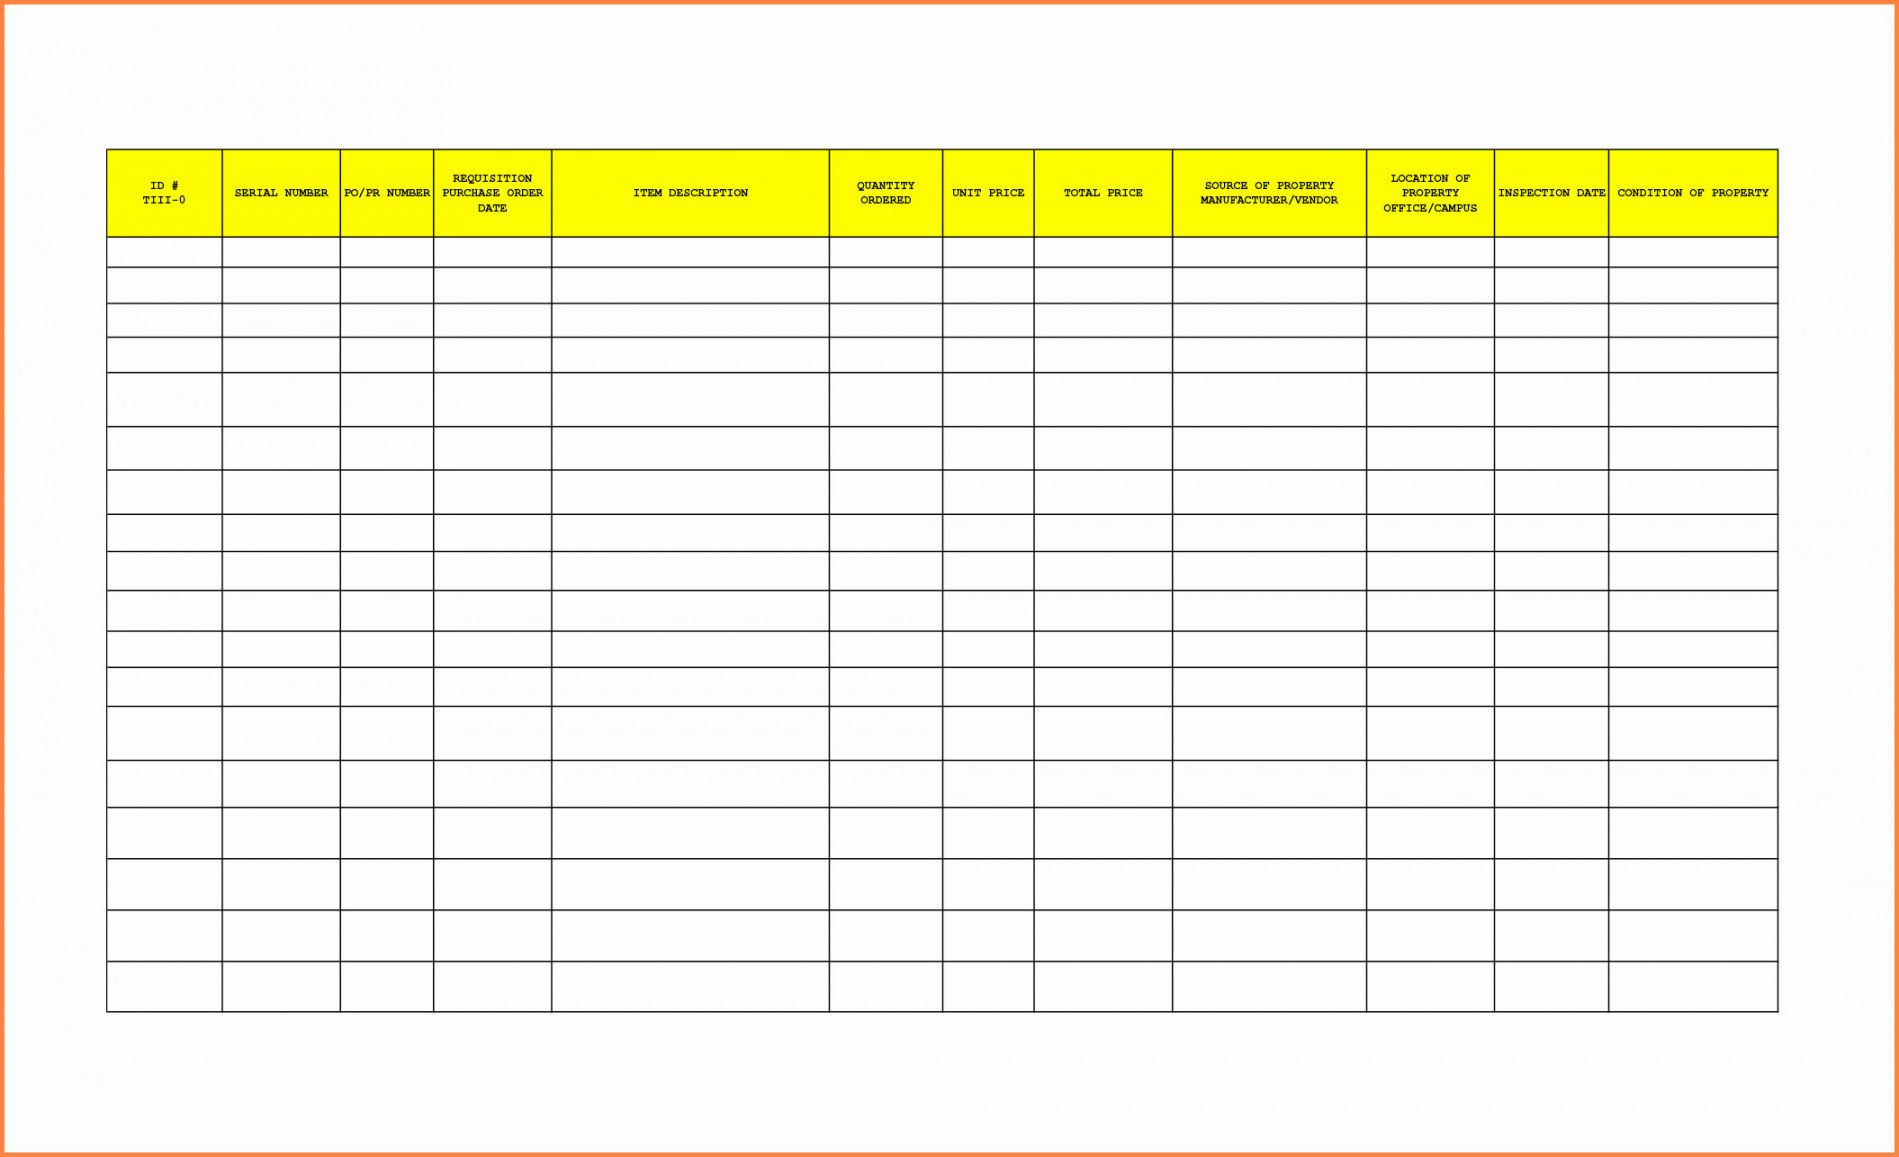 office-supply-checklist-template